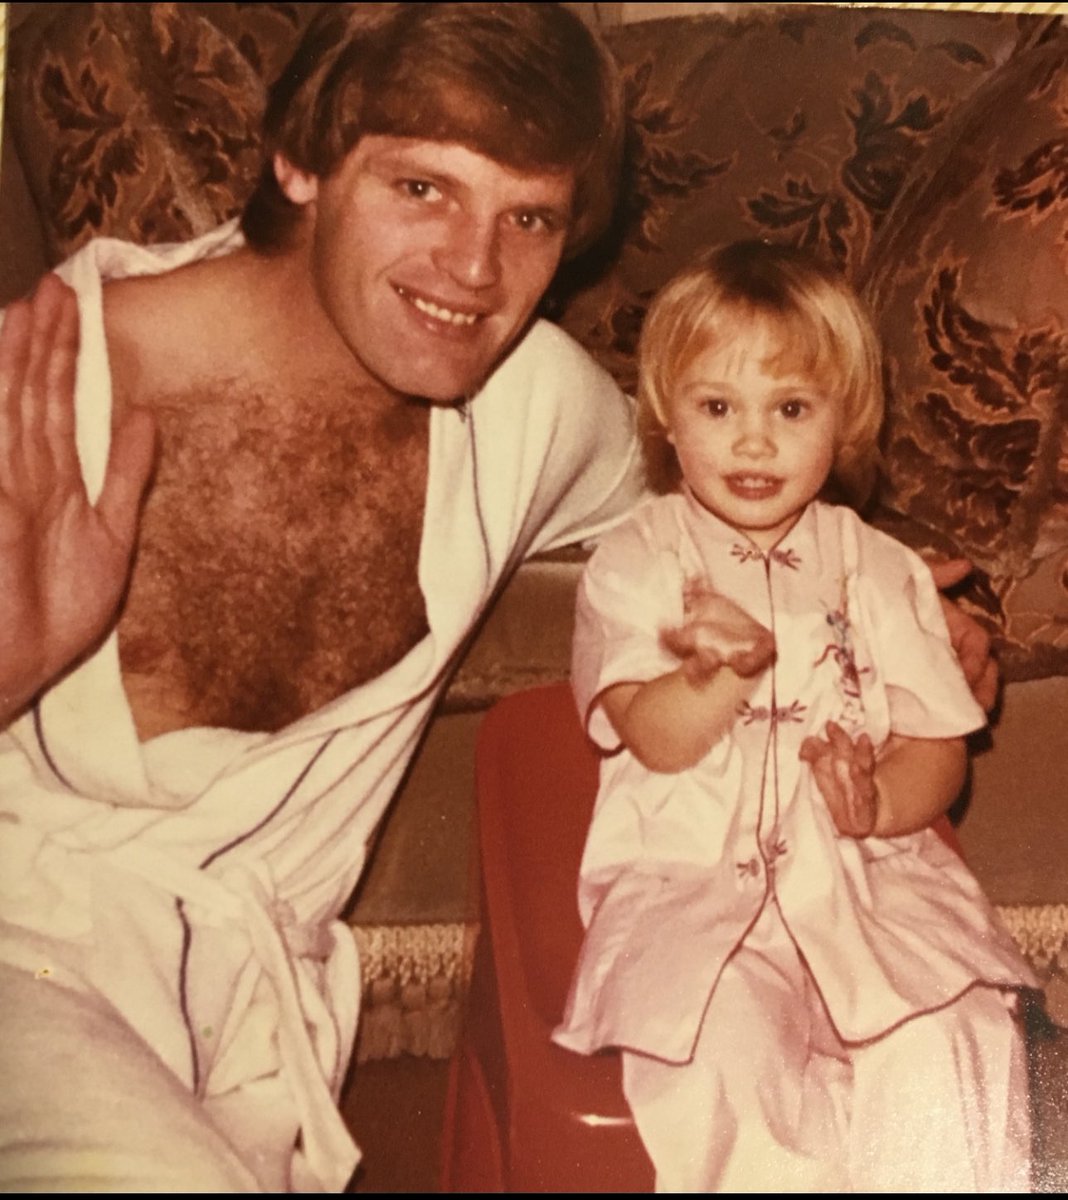 Happy Year of the Dragon to everyone celebrating #ChineseNewYear today! We always celebrated as a family so here’s a little flashback from the 80’s…..just me and my dad’s impressively hairy chest.